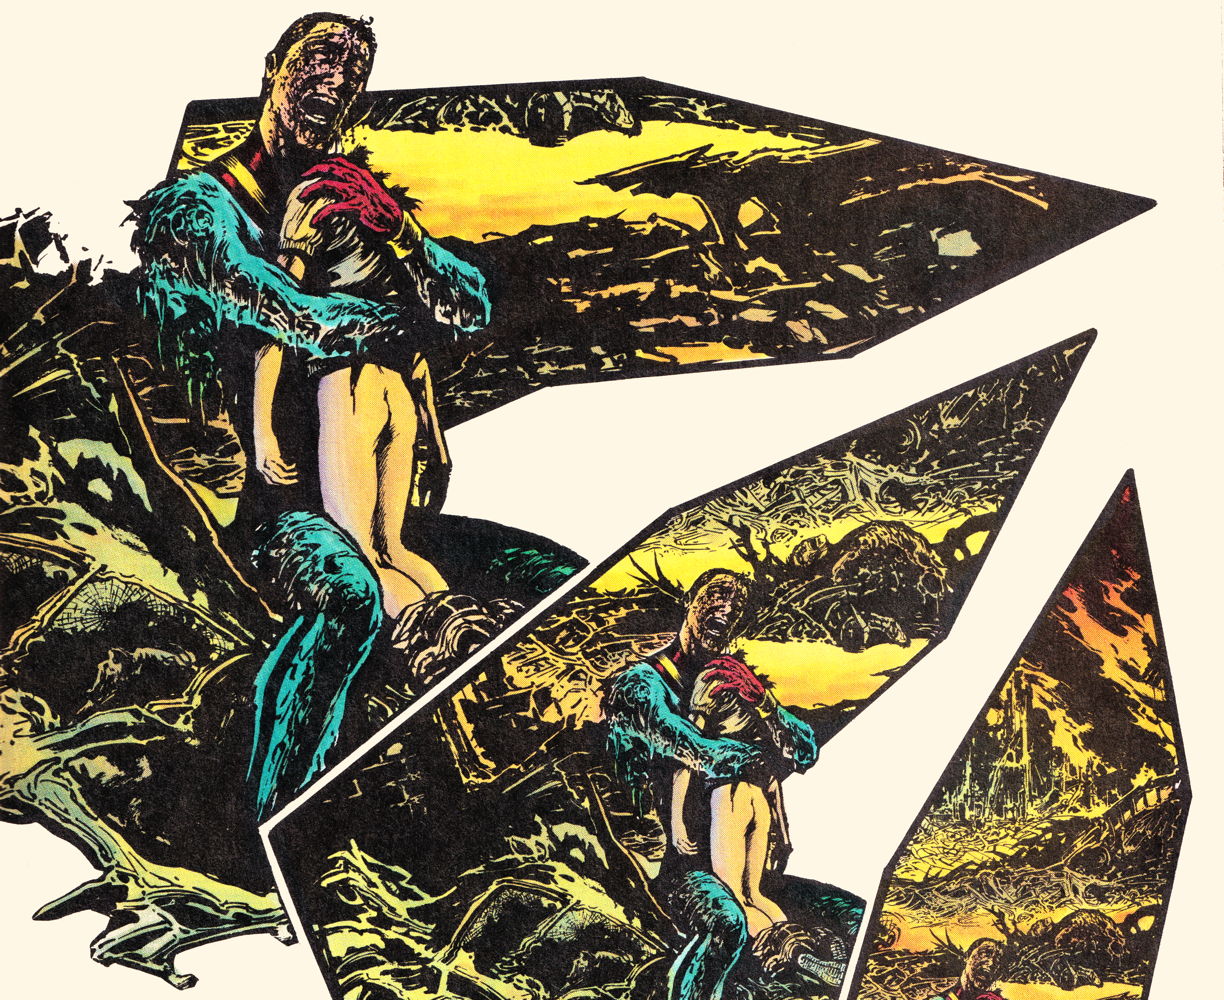 Miracle Man cradling Johnny Bates: Miracle Man cradles the headless corpse of Johnny Bates after crushing the boy’s head. Miracleman, issue 15, page 19.; Alan Moore; Miracleman; John Totleben